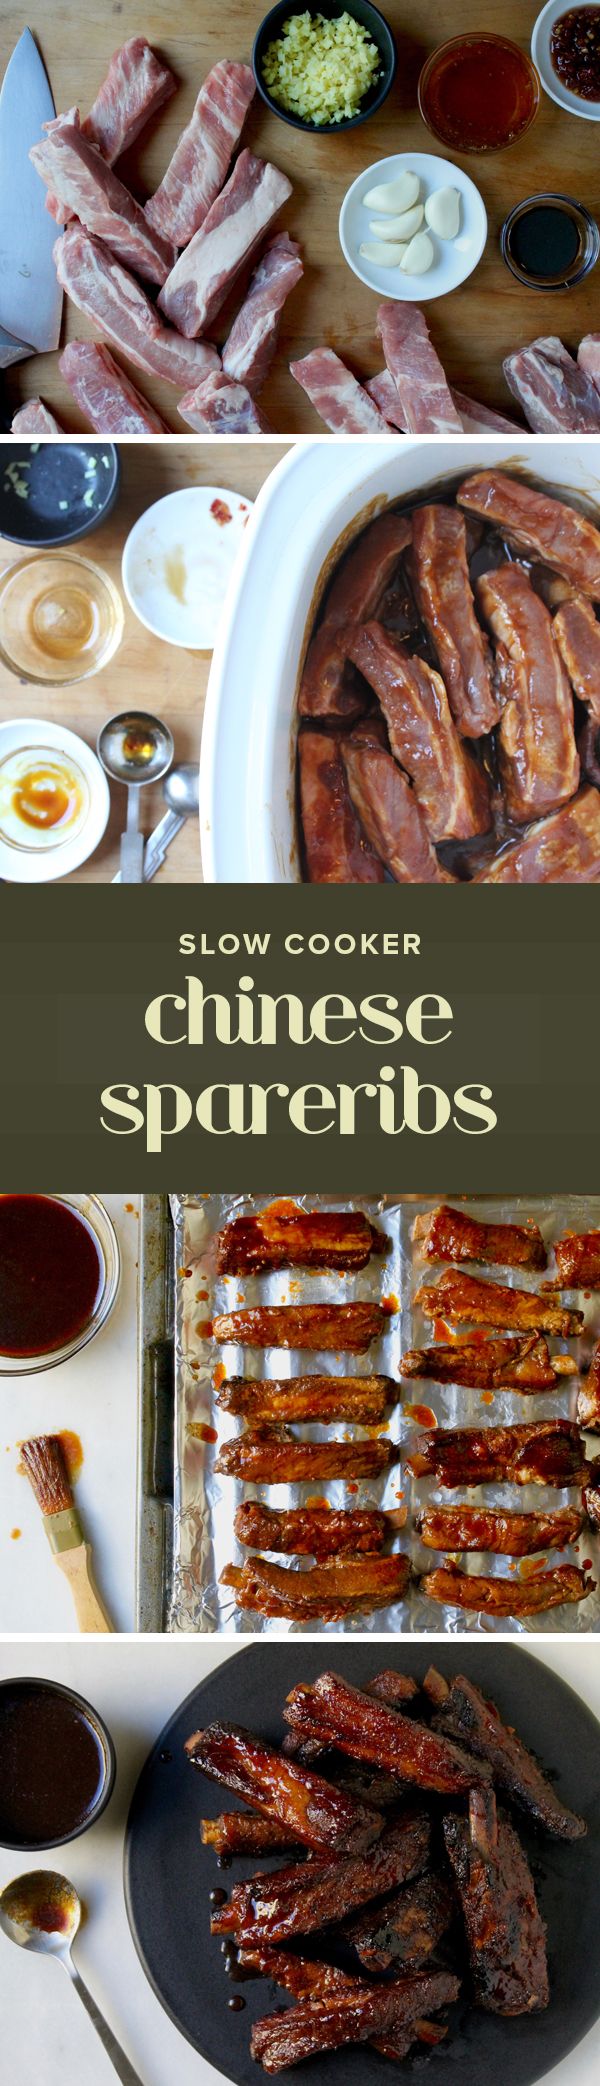 Slow-Cooker Chinese Spareribs